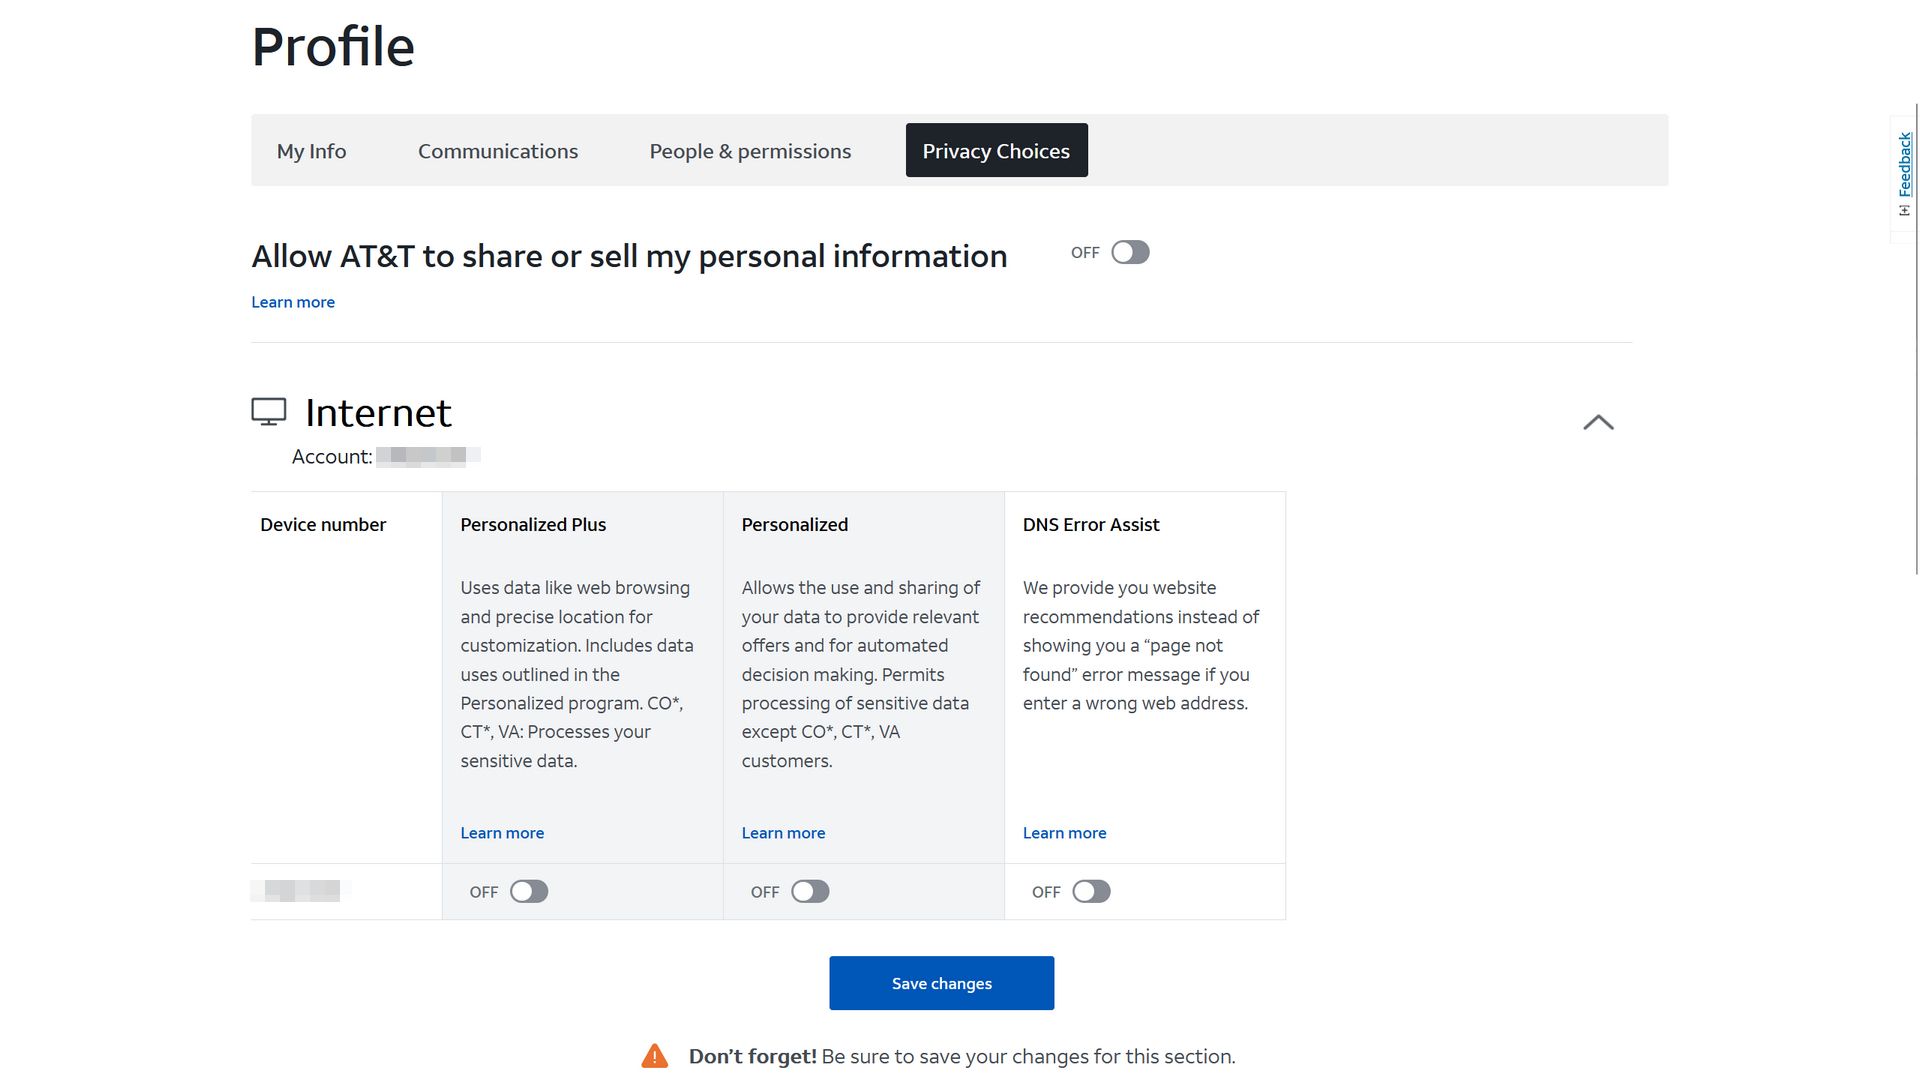 A screenshot of the ATT privacy profile page showing the individual privacy toggles.